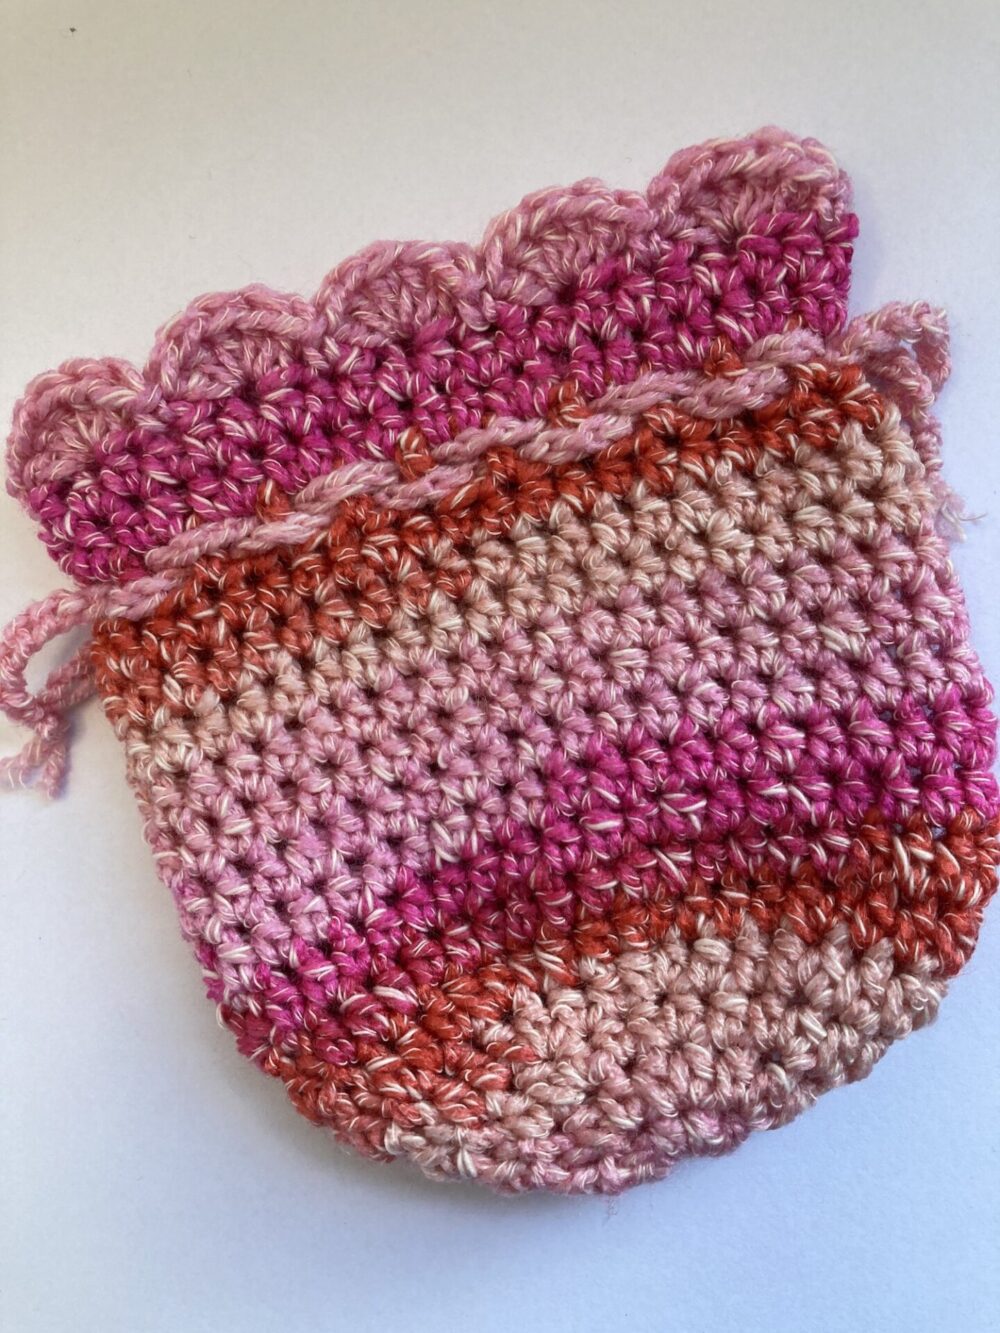 gift-bags-kids-cotton-crochet-pink-variegated